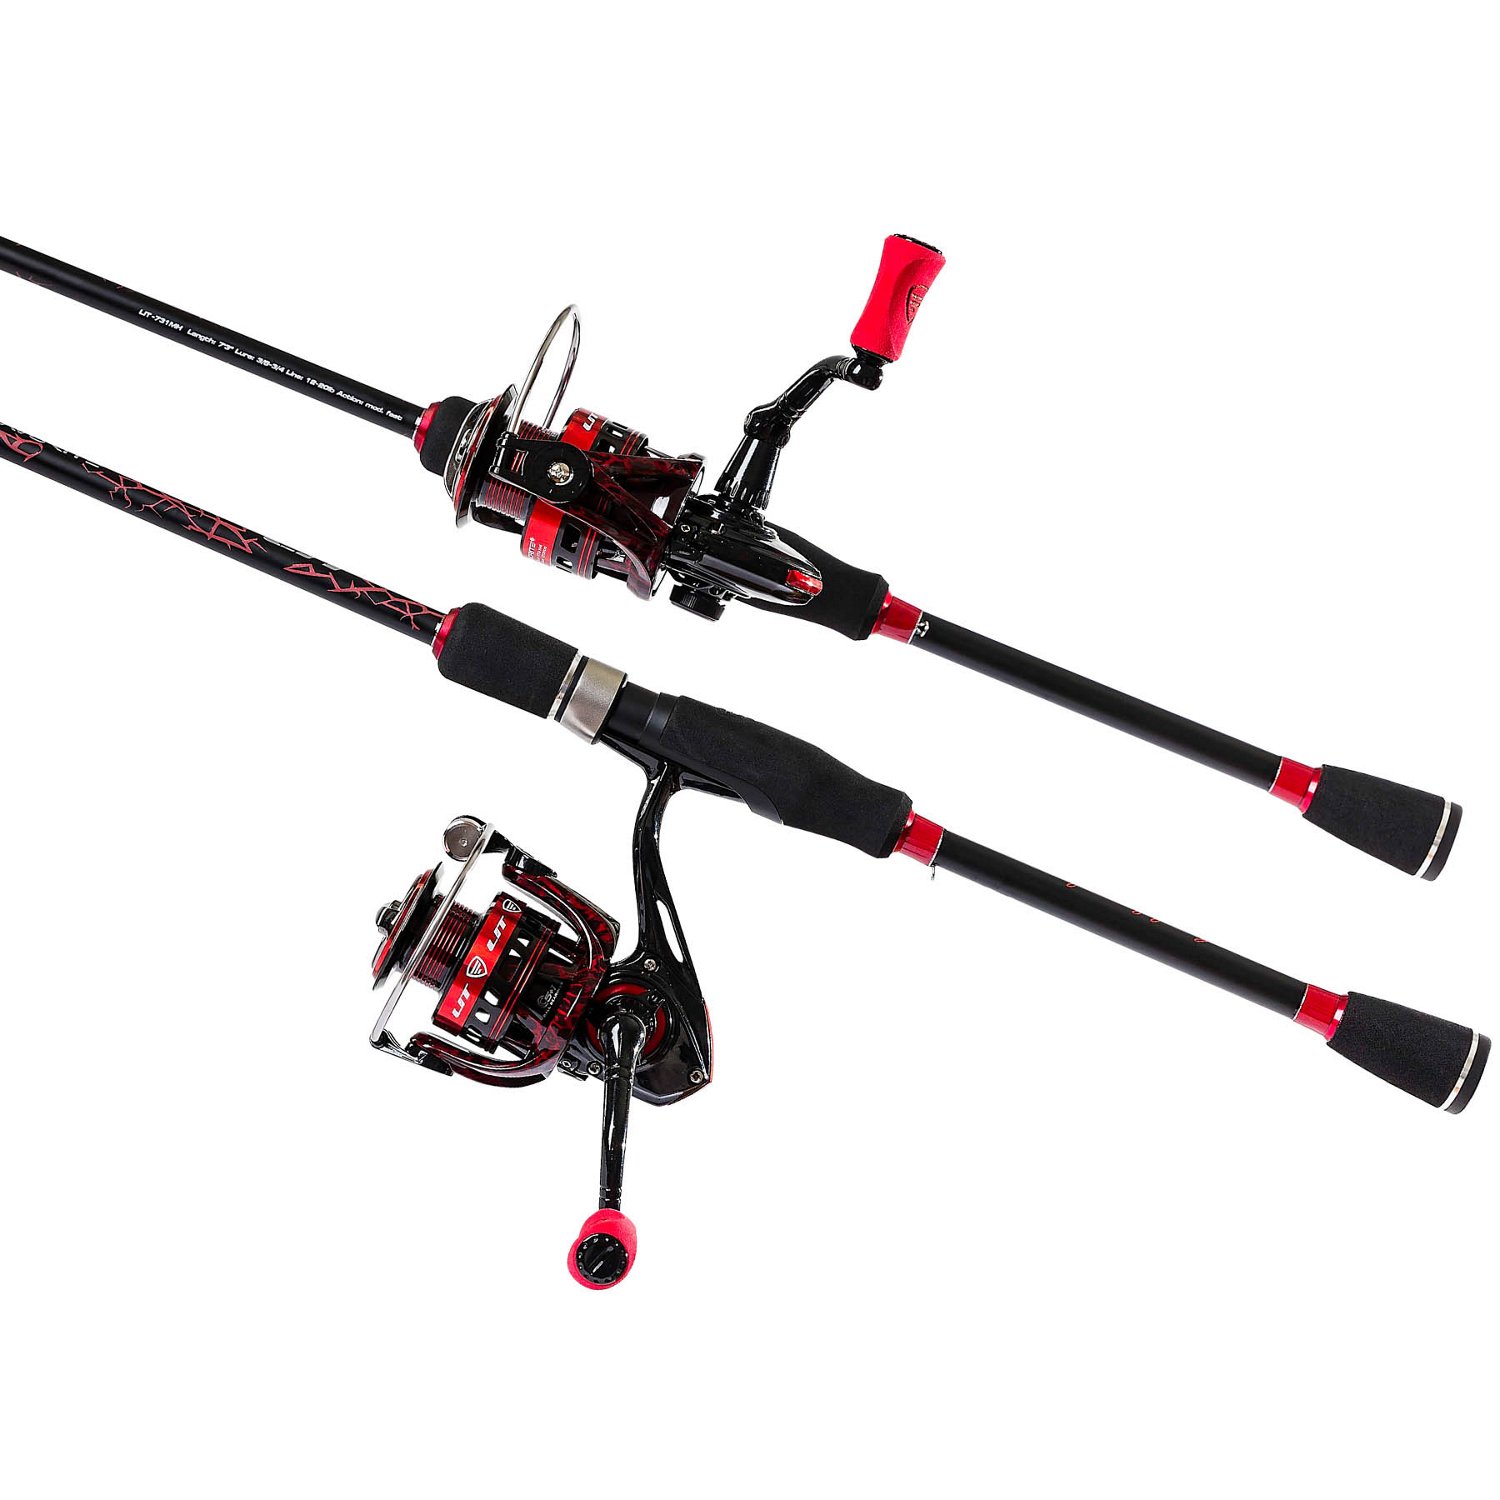 Favorite Fishing Lit 3000 Series 7 ft 3 in MH Spinning Rod and